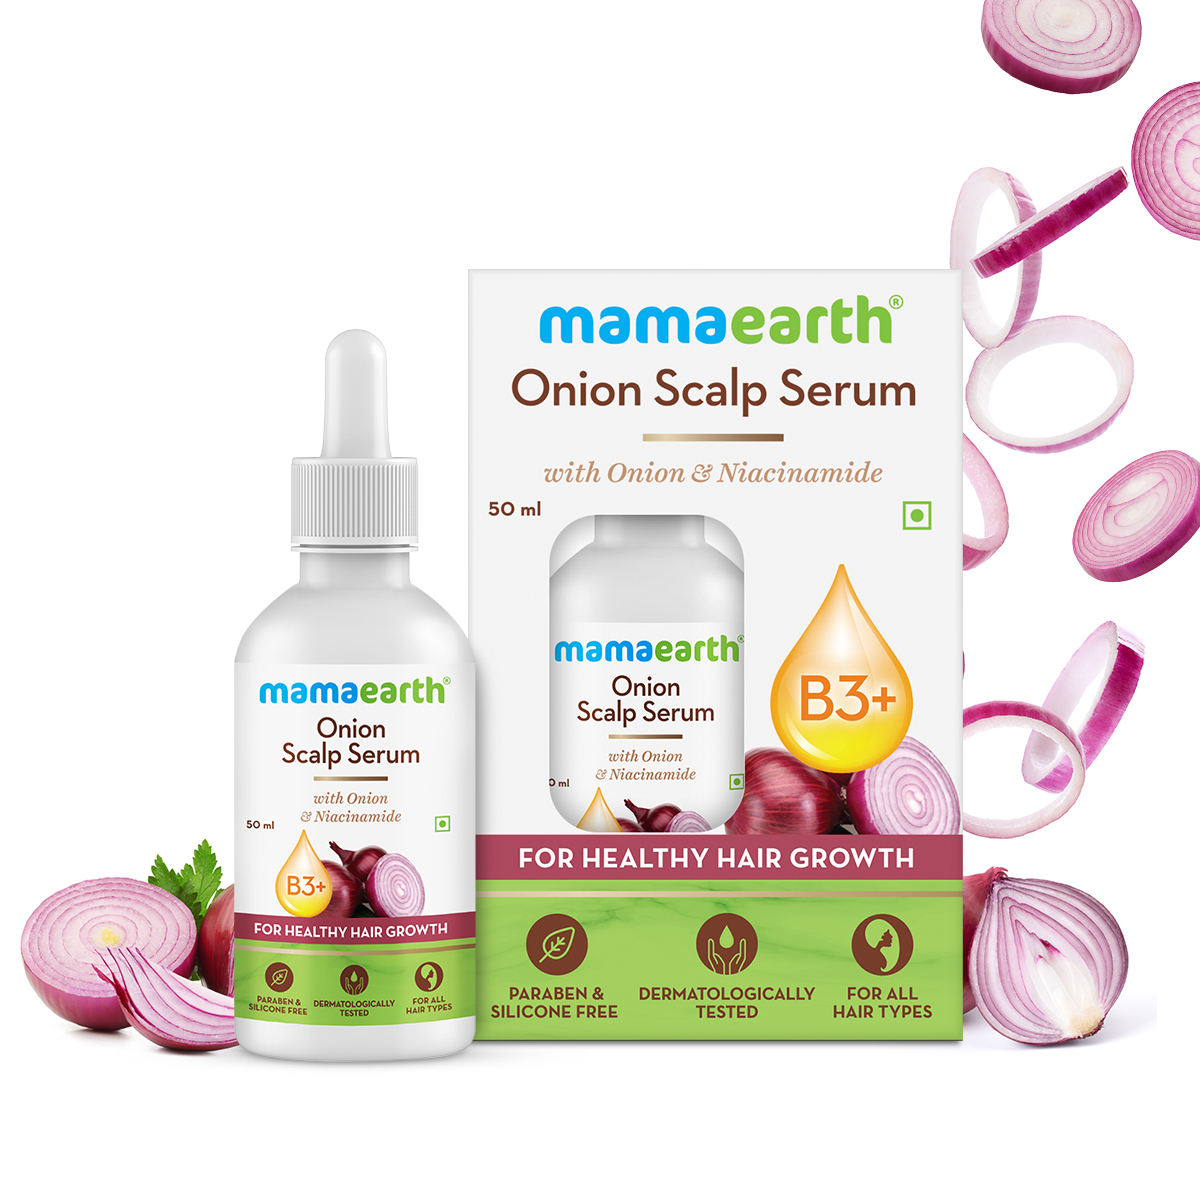 MamaEarth Onion Scalp Serum with Onion & Niacinamide for Healthy Hair Growth